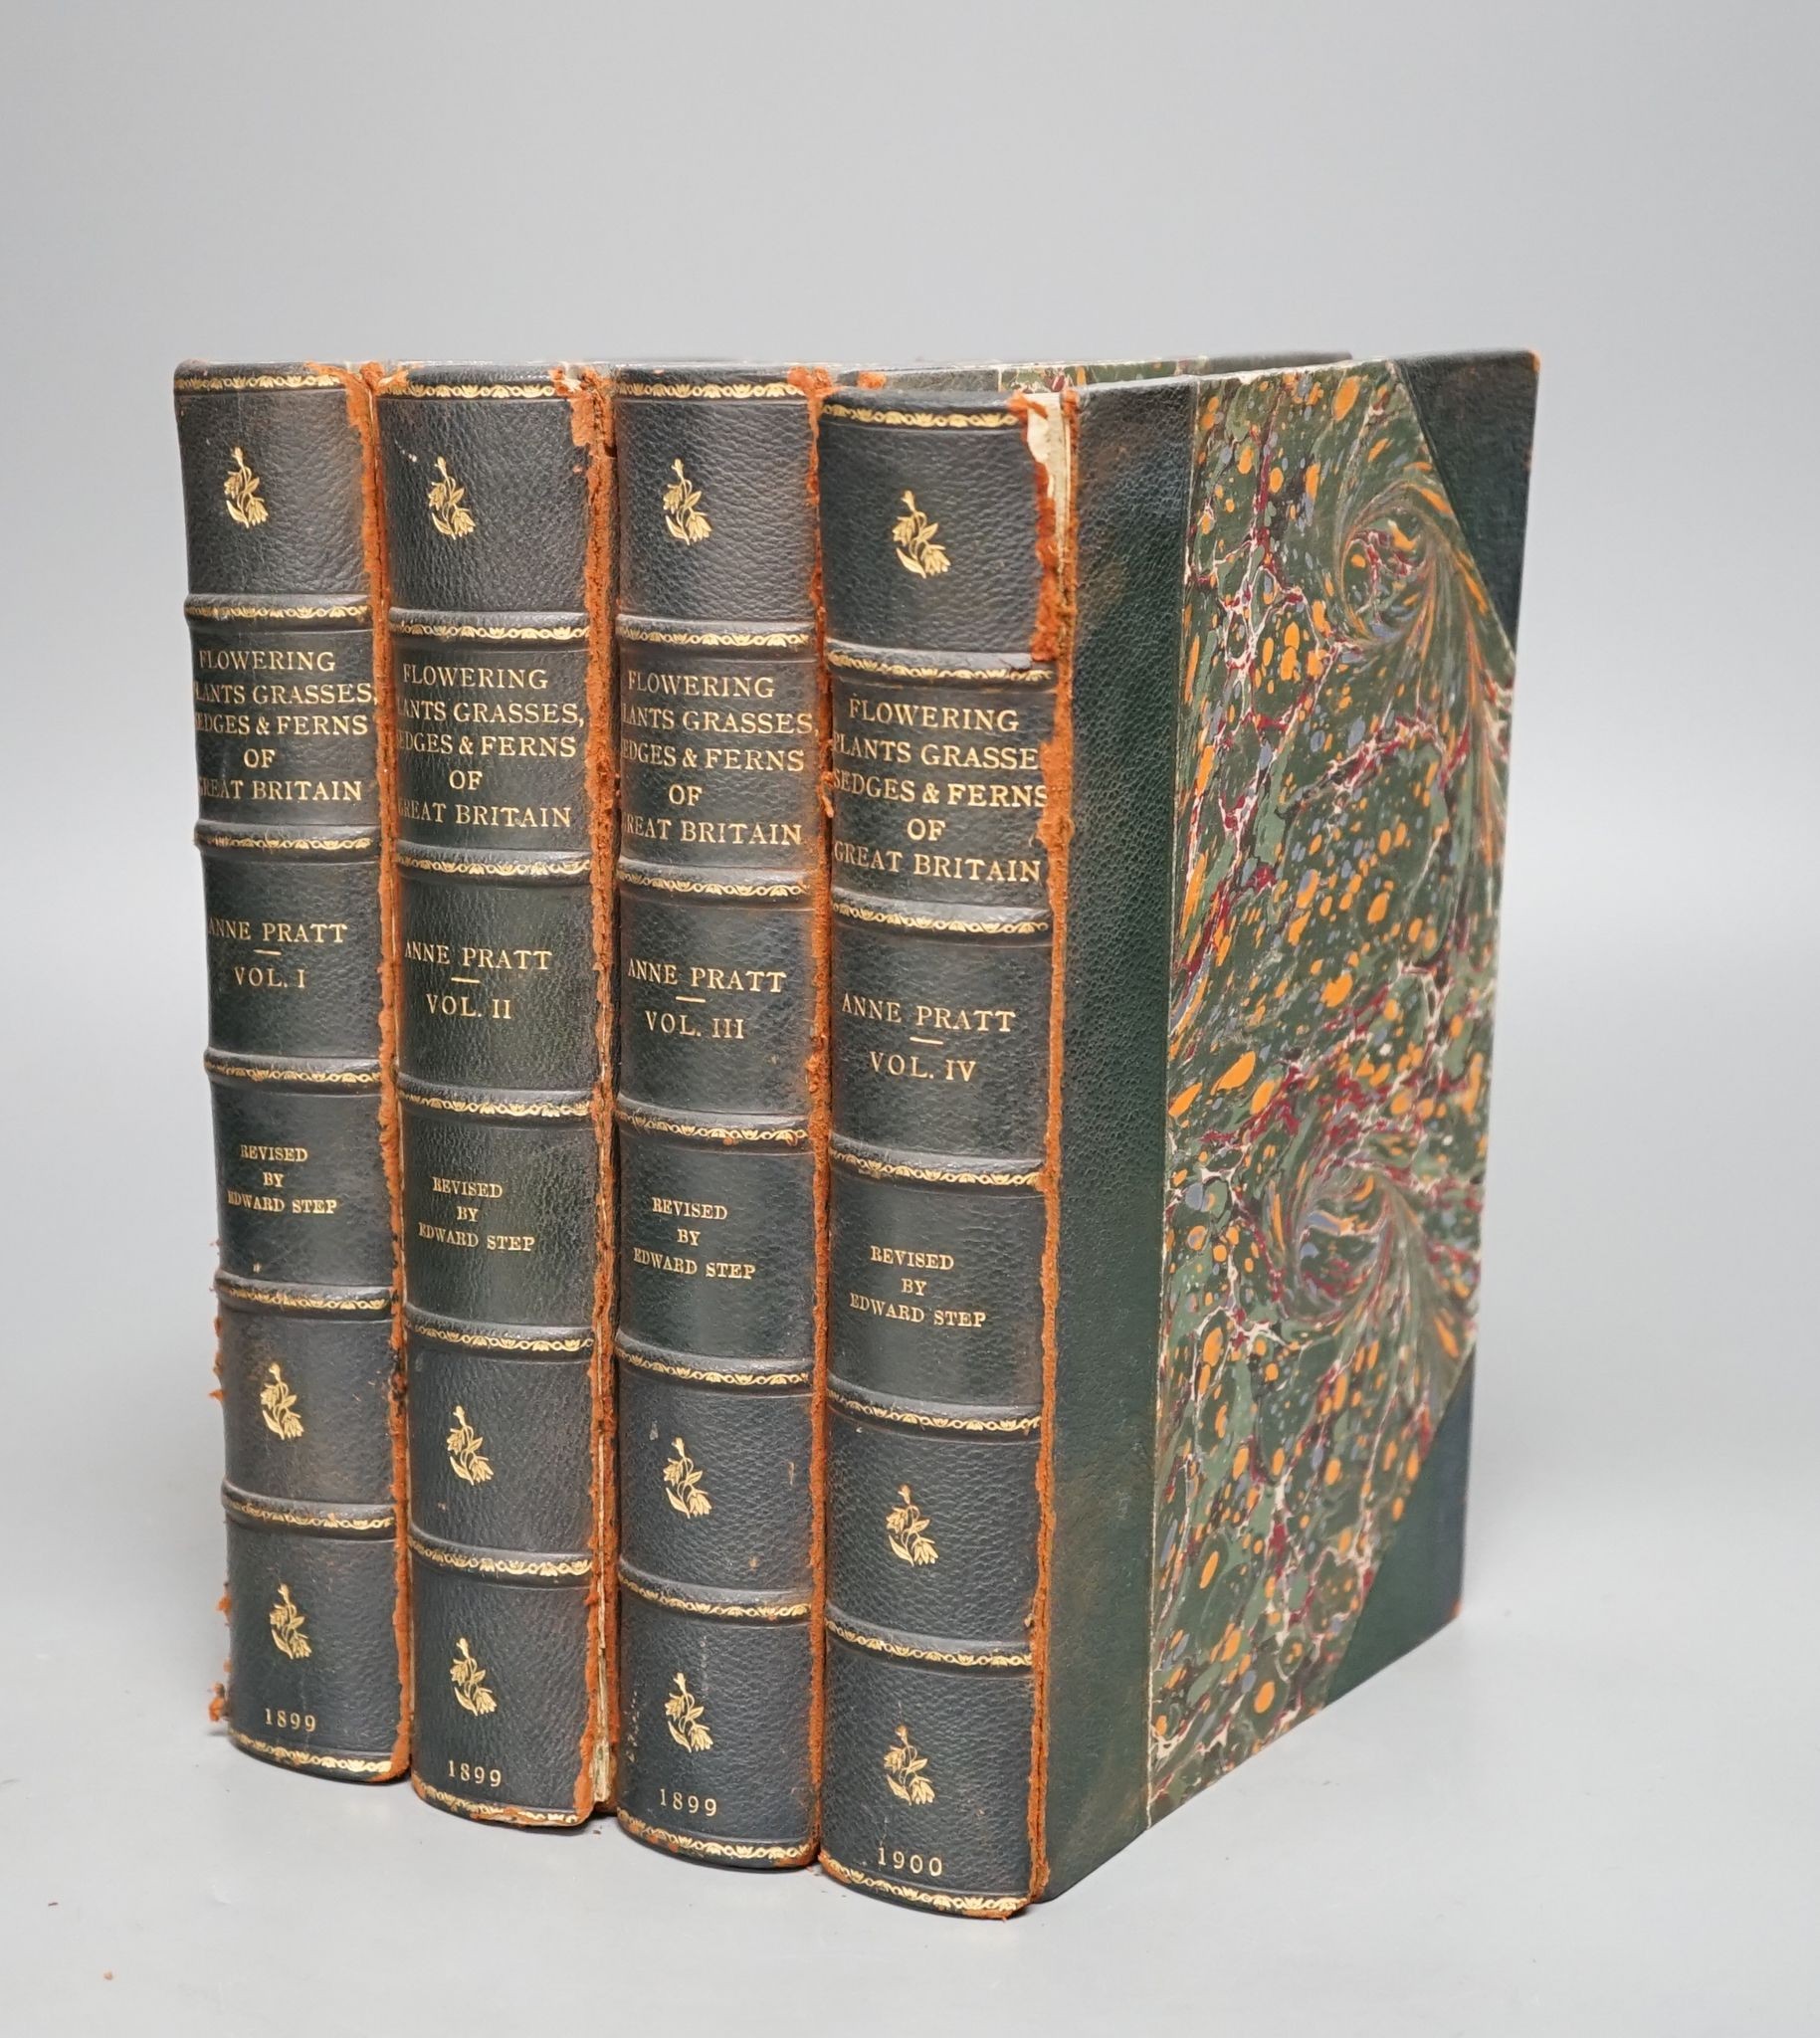 Pratt, Anne - the Flowering Plants, Grasses, Sedges and Ferns of Great Britain.....new edition revised by Edward Step, 4 vols many colour printed plates, contemp. half morocco and marbled boards, gilt panelled spines, gi